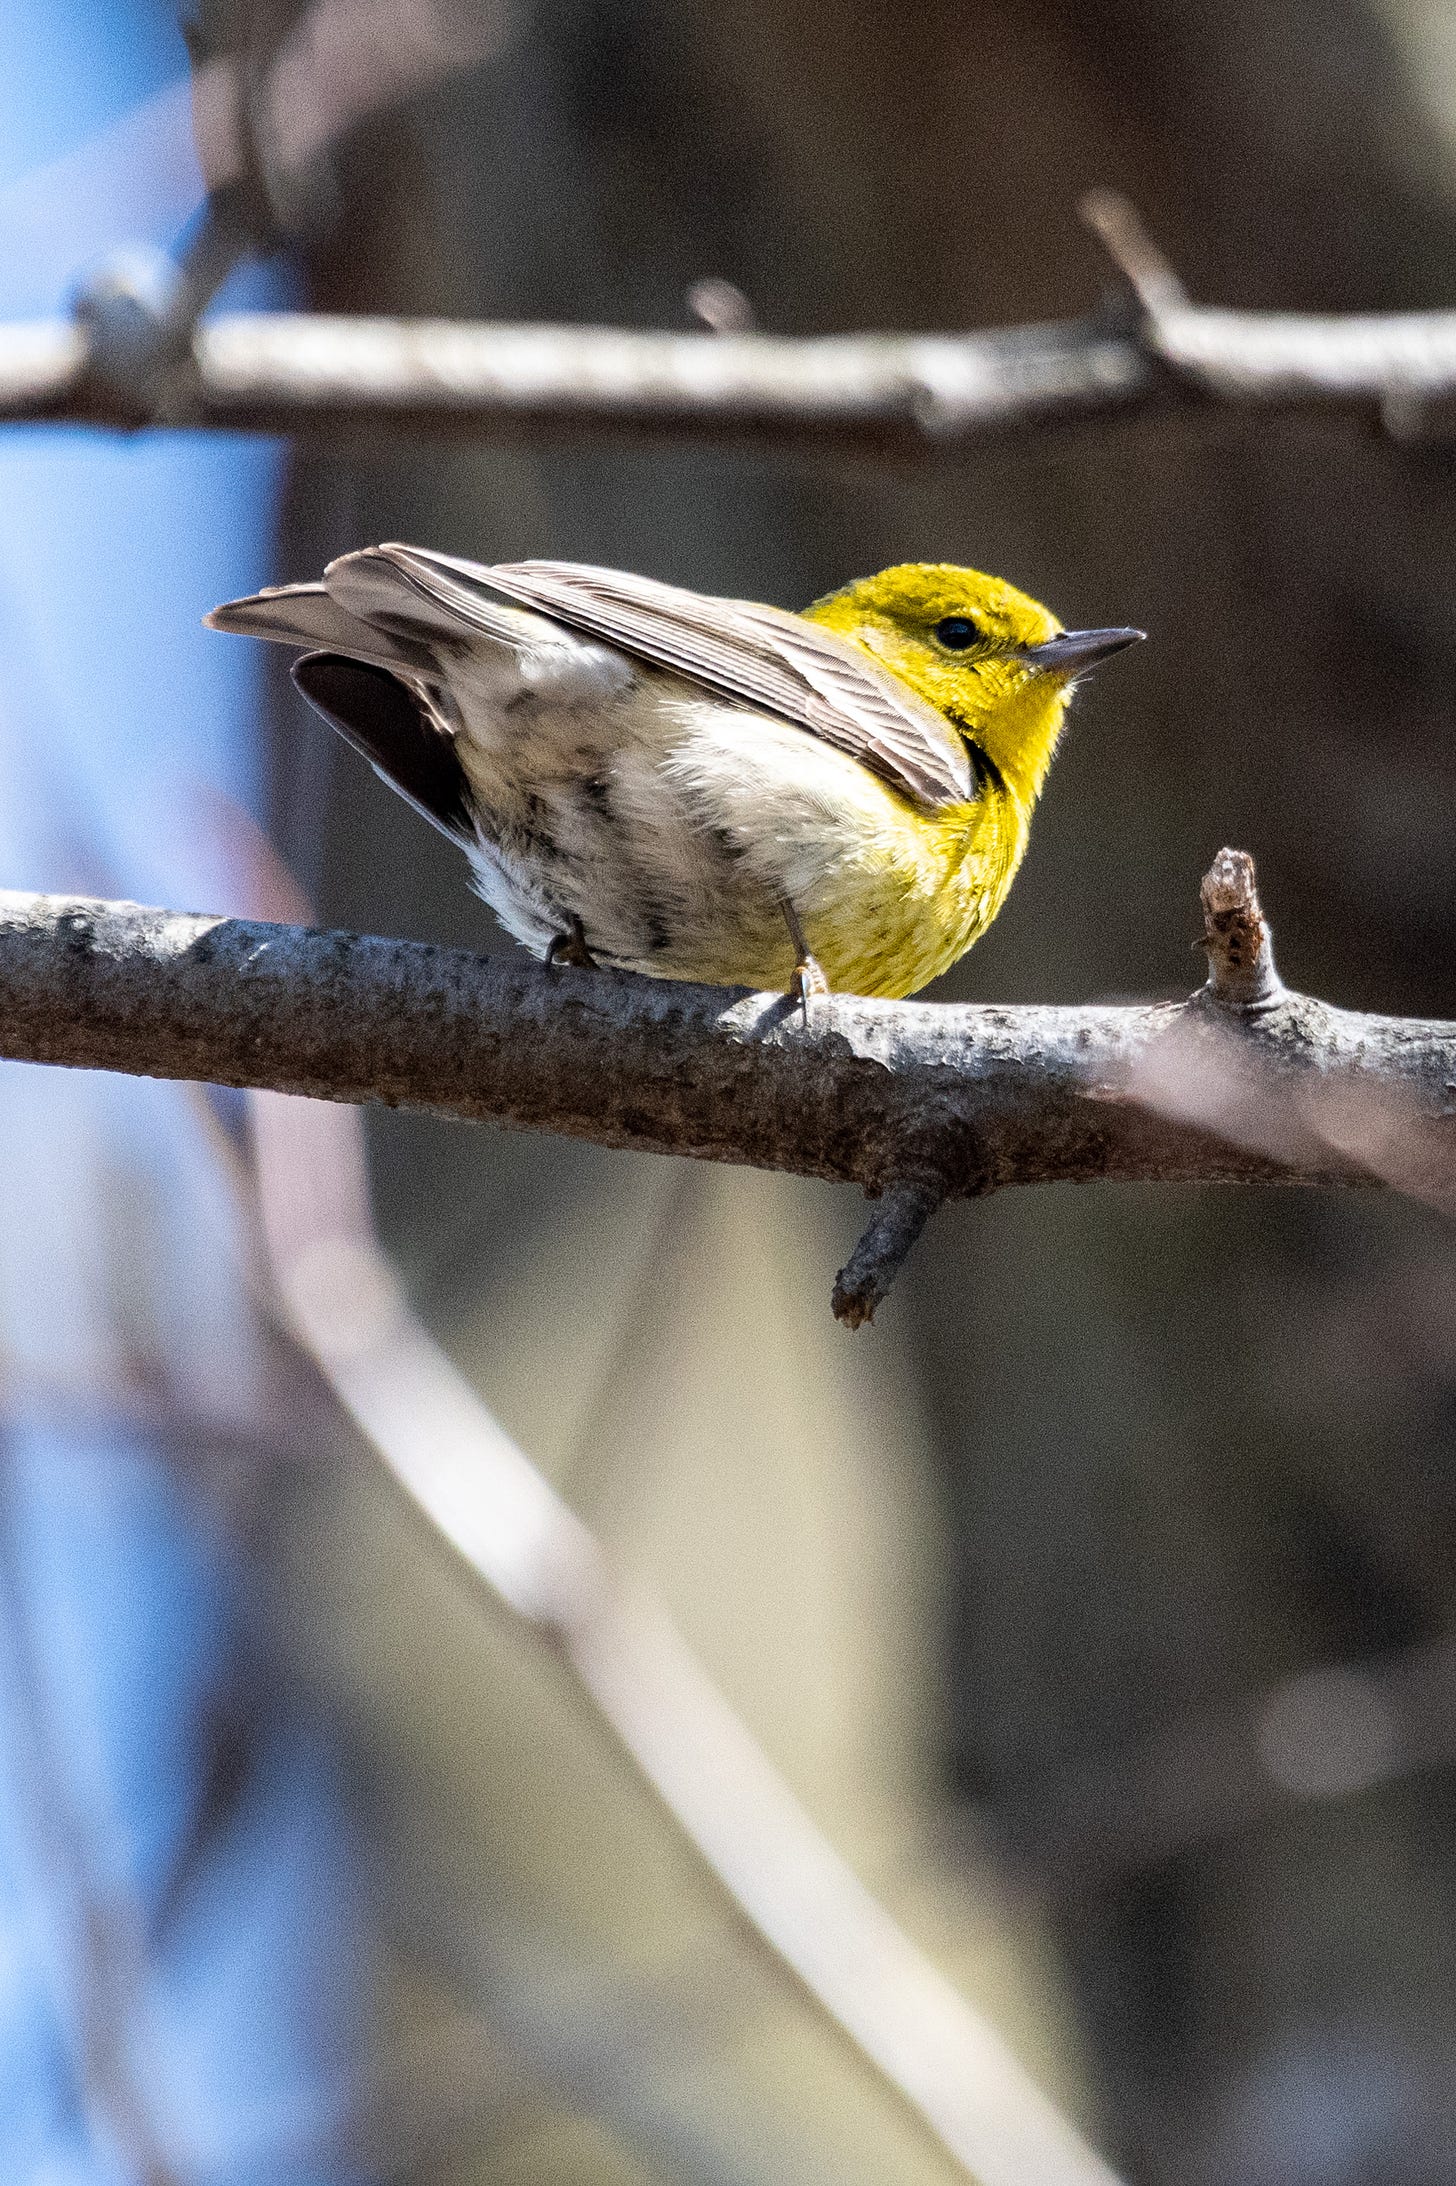 A pine warbler, with a bright yellow face and a gray eyestreak, seen from below and behind